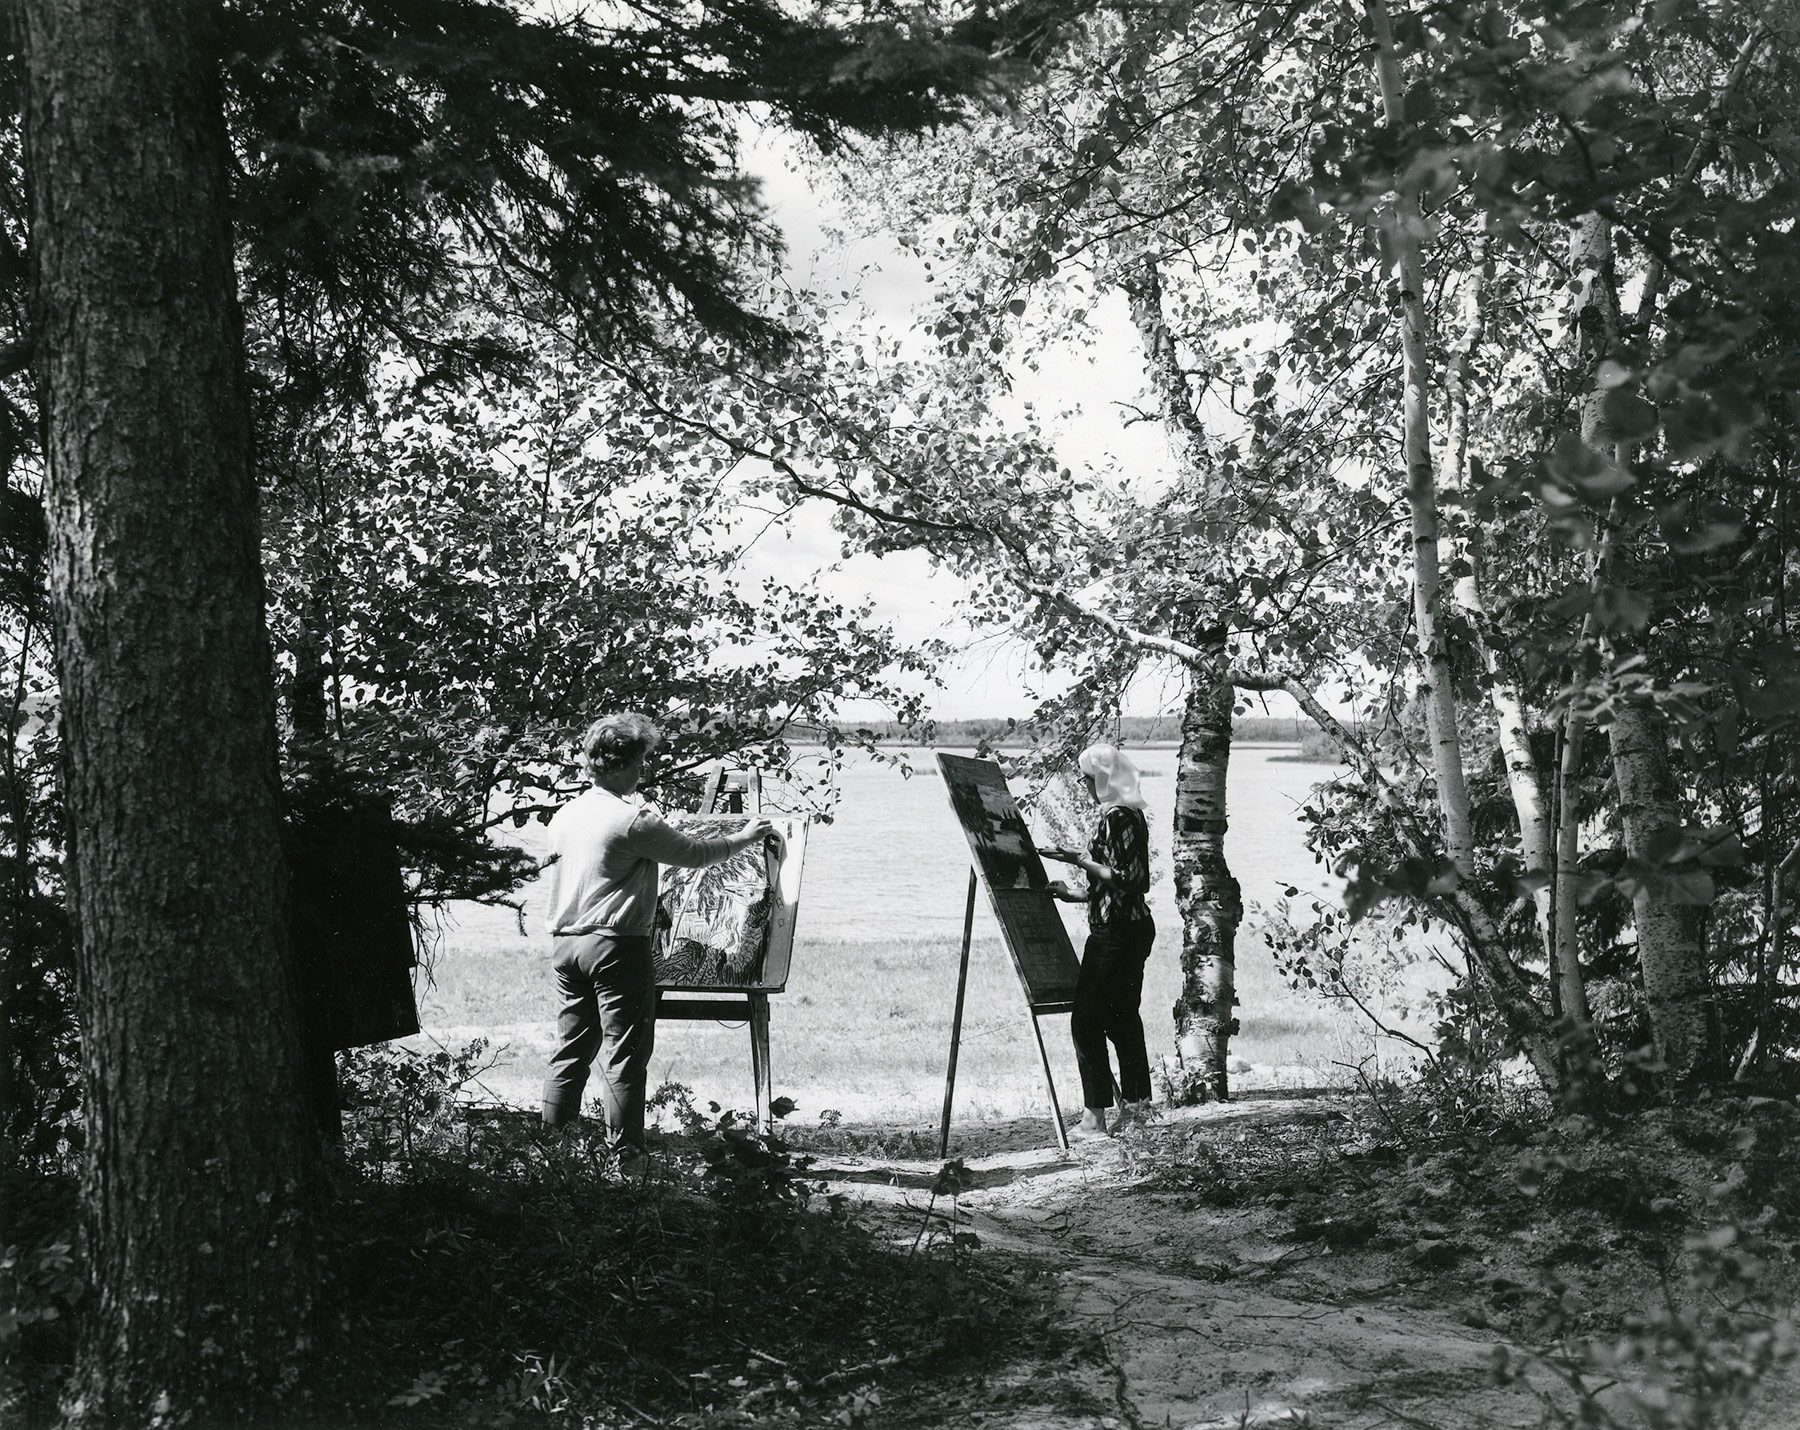 Black and white photograph of two women, surrounded by trees, standing in front of easels and painting. A shoreline and lake is visible in the distance.